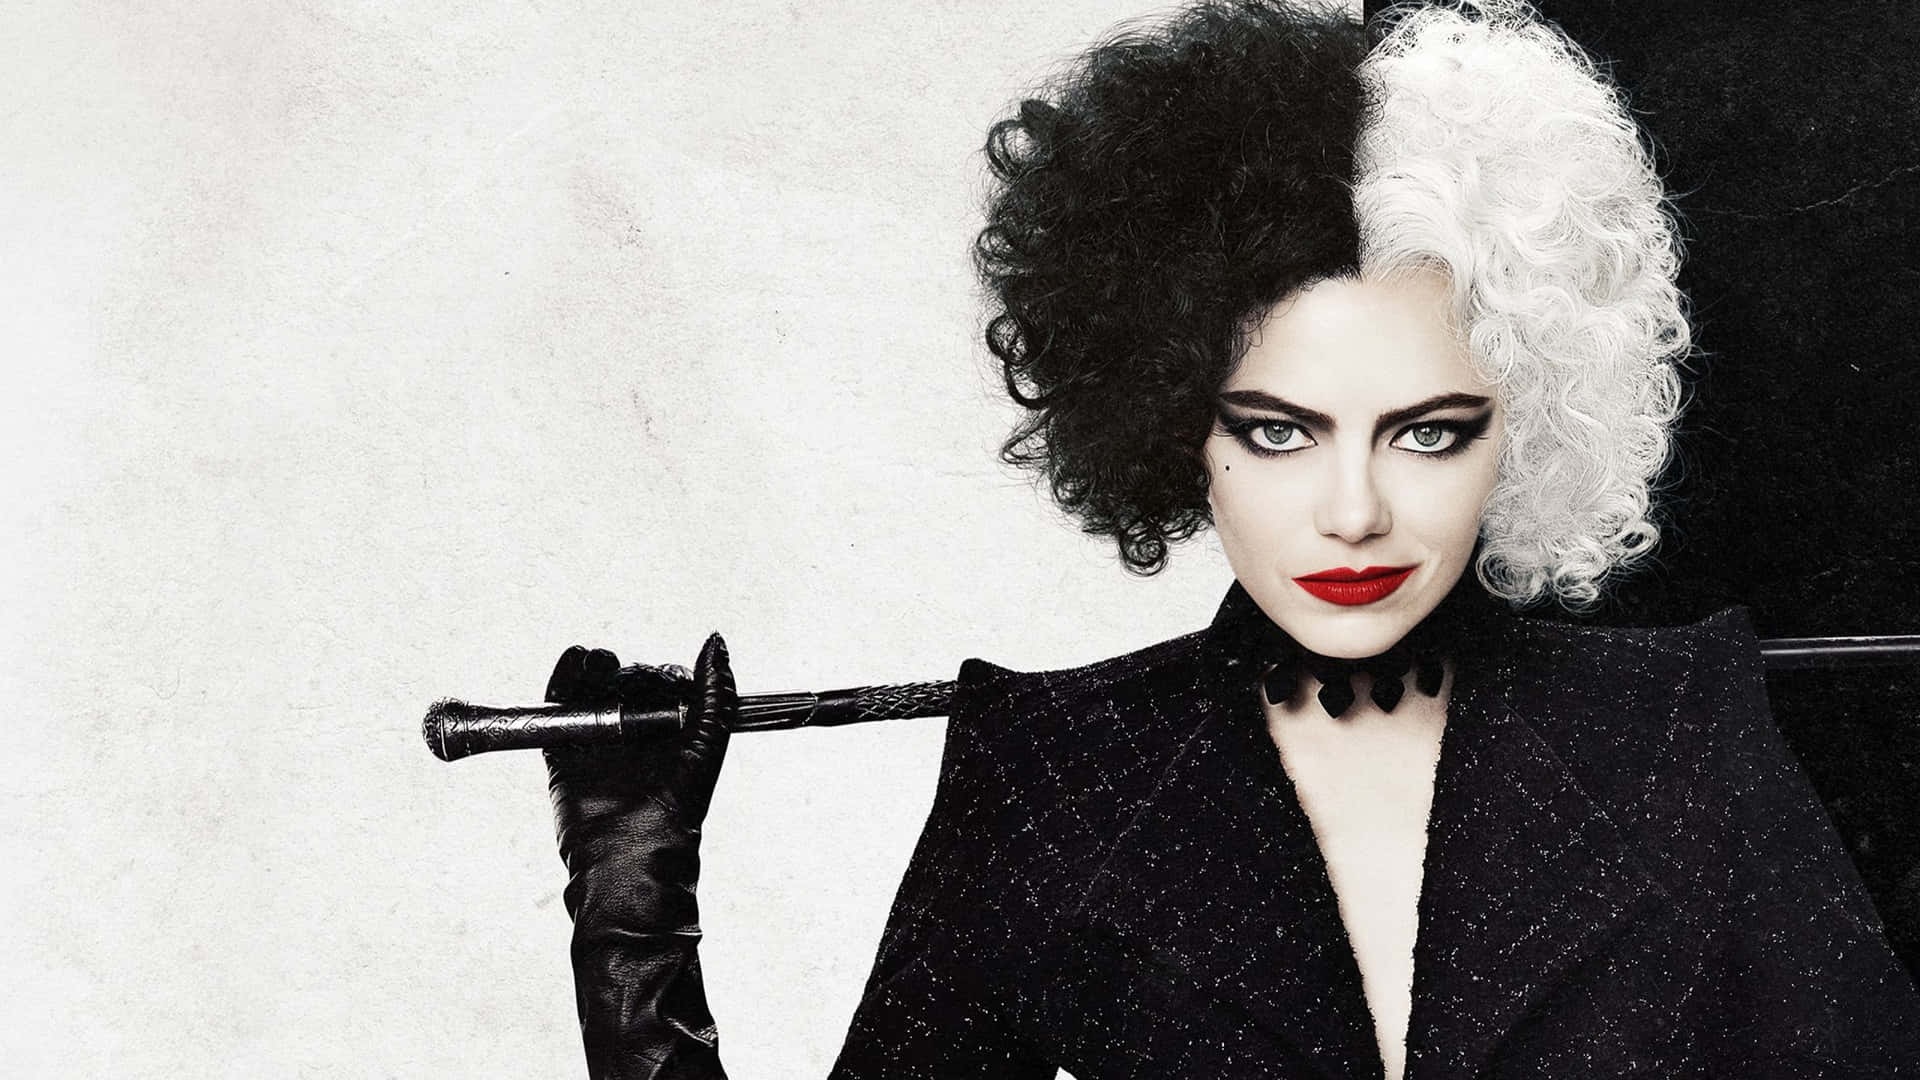 Get your fashion fix with this Cruella De Vil inspired look.